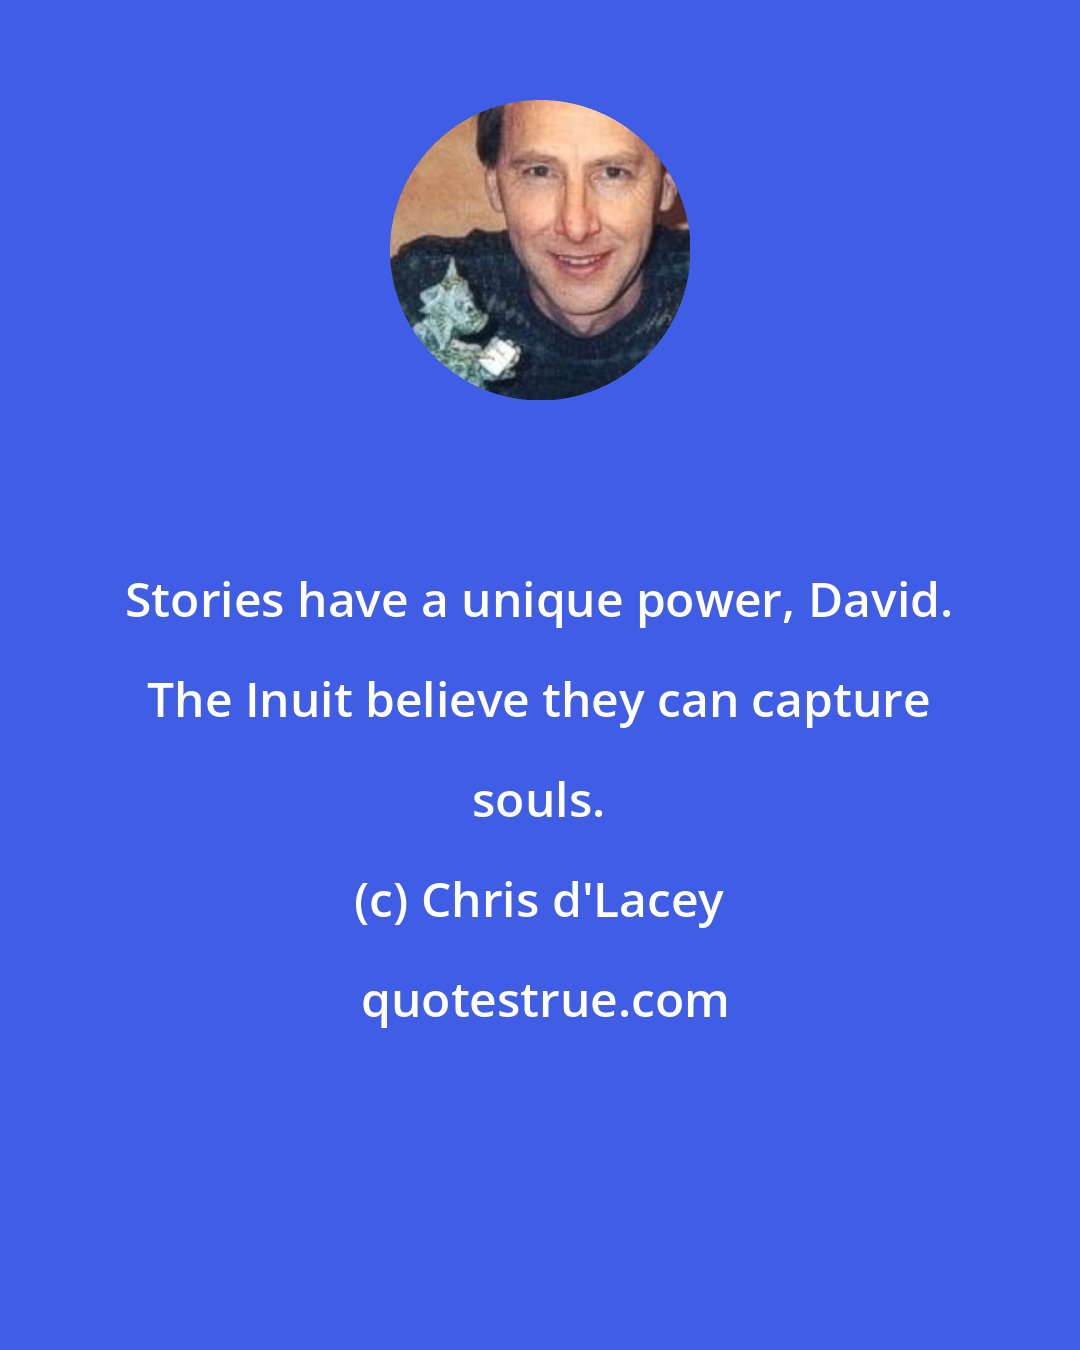 Chris d'Lacey: Stories have a unique power, David. The Inuit believe they can capture souls.